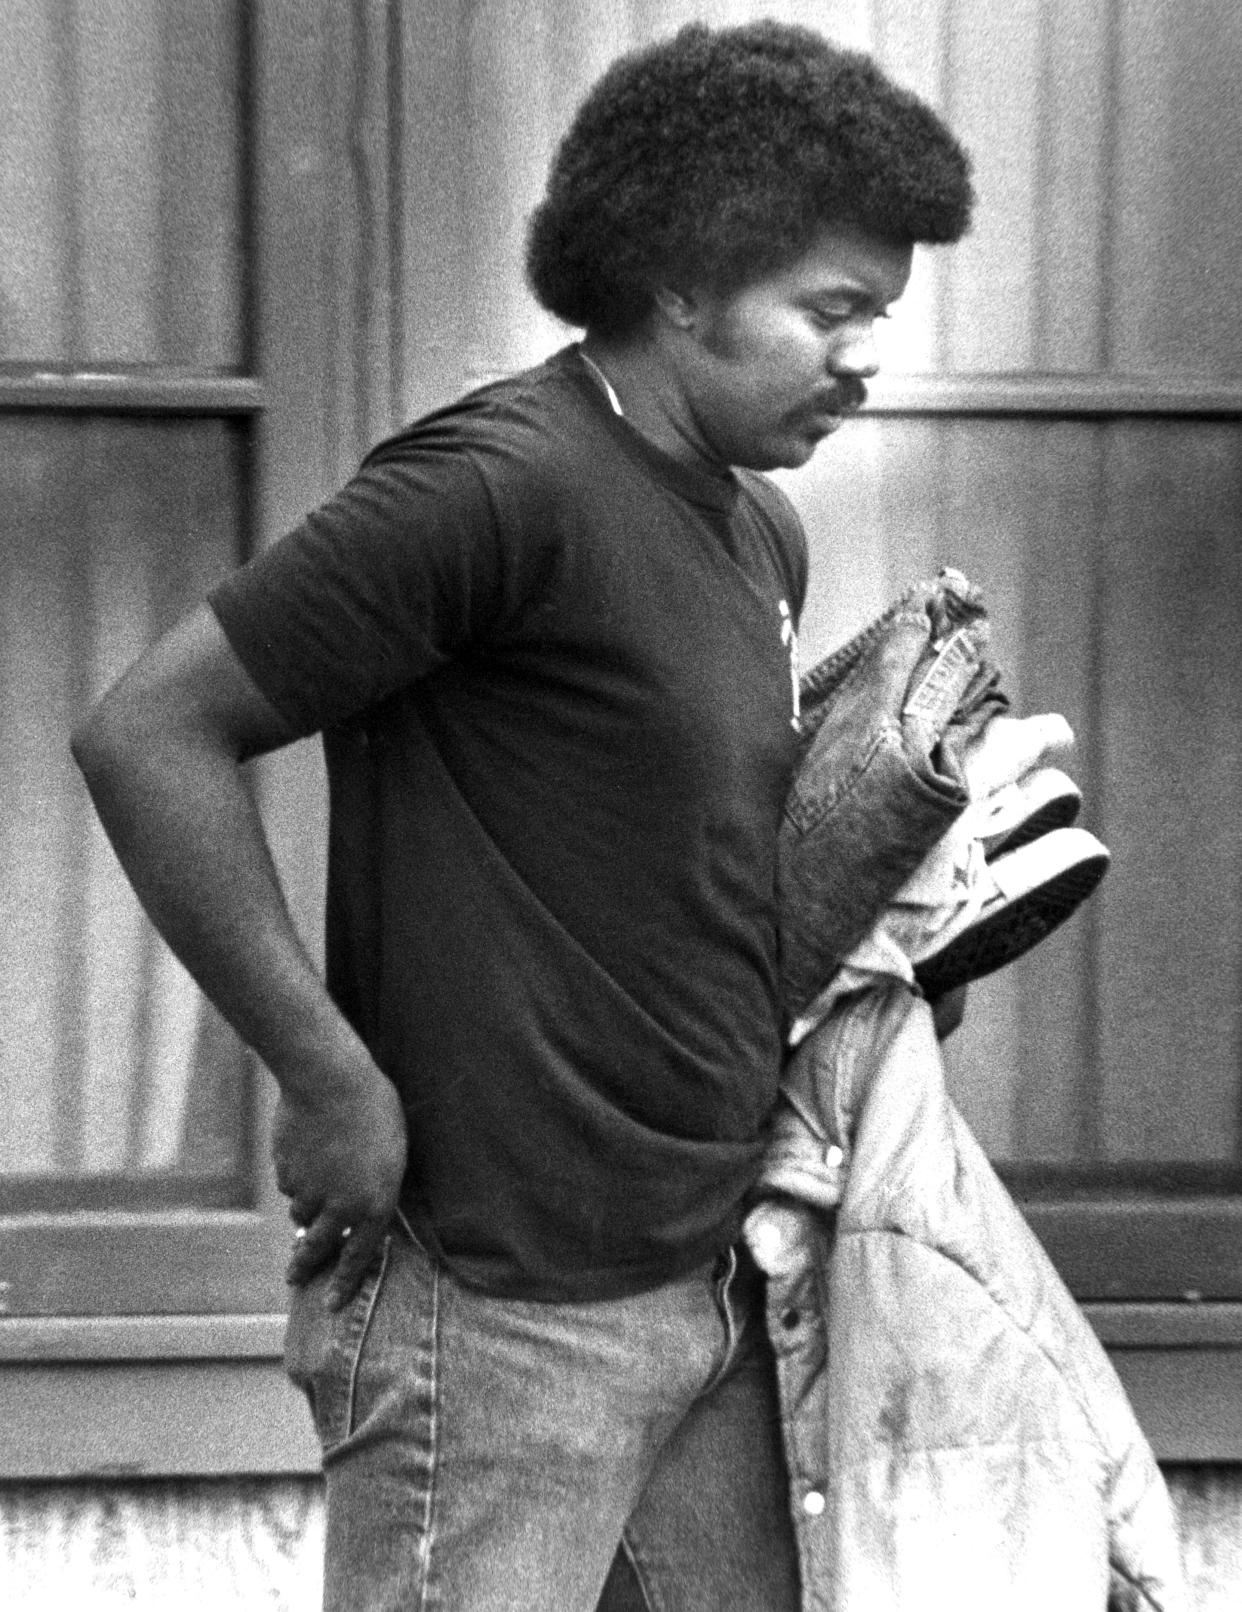 Billy Brown seen in this March 9, 1982 photo, the day of the double-murder of Susanna Flores Brown and her 8 year-old daughter Francisca Antoinette Martinez. According to Reporter-News file stories, Brown claimed that he came home from work after 3 a.m. to find Flores Brown and her daughter dead. Citing DNA evidence, police have now charged him with the murders 41 years later.